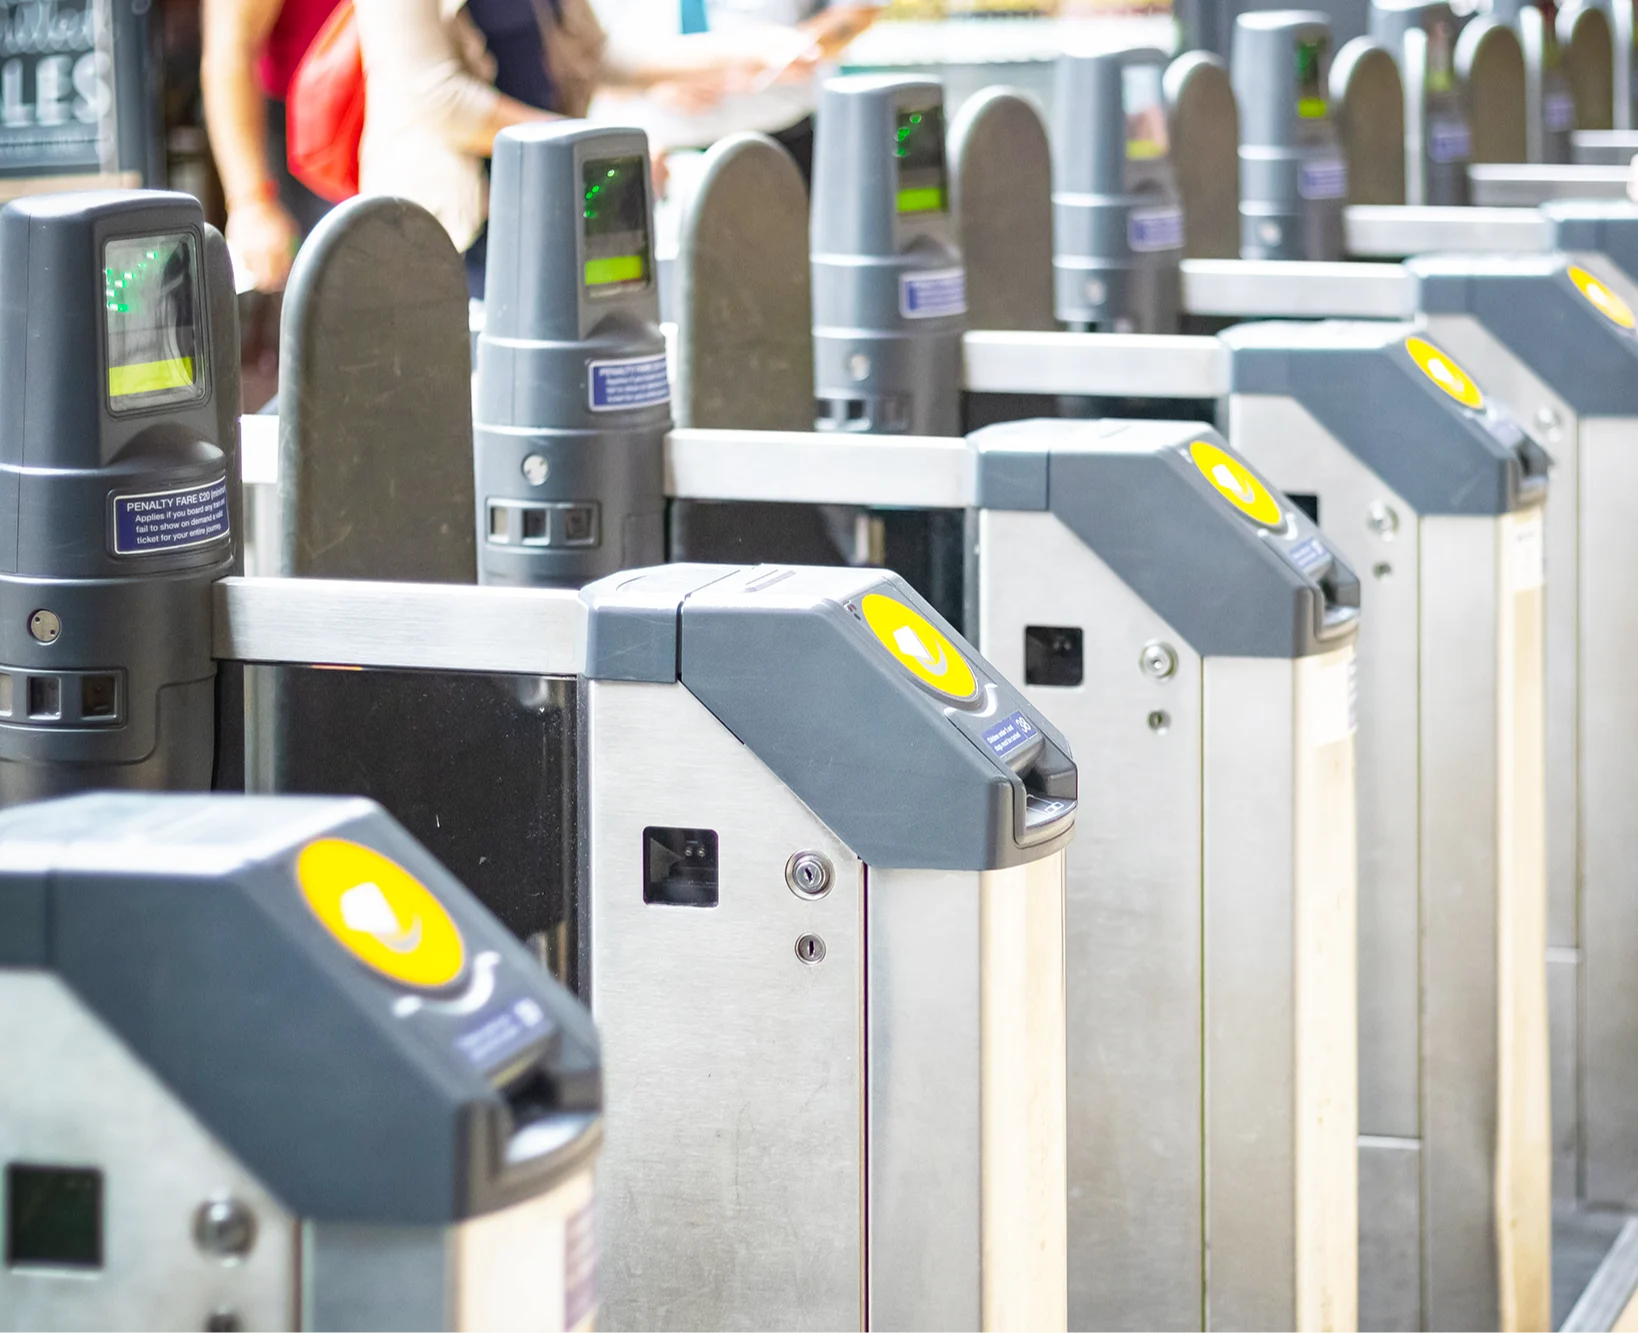 A row of ticket barriers with contactless readers at a train station